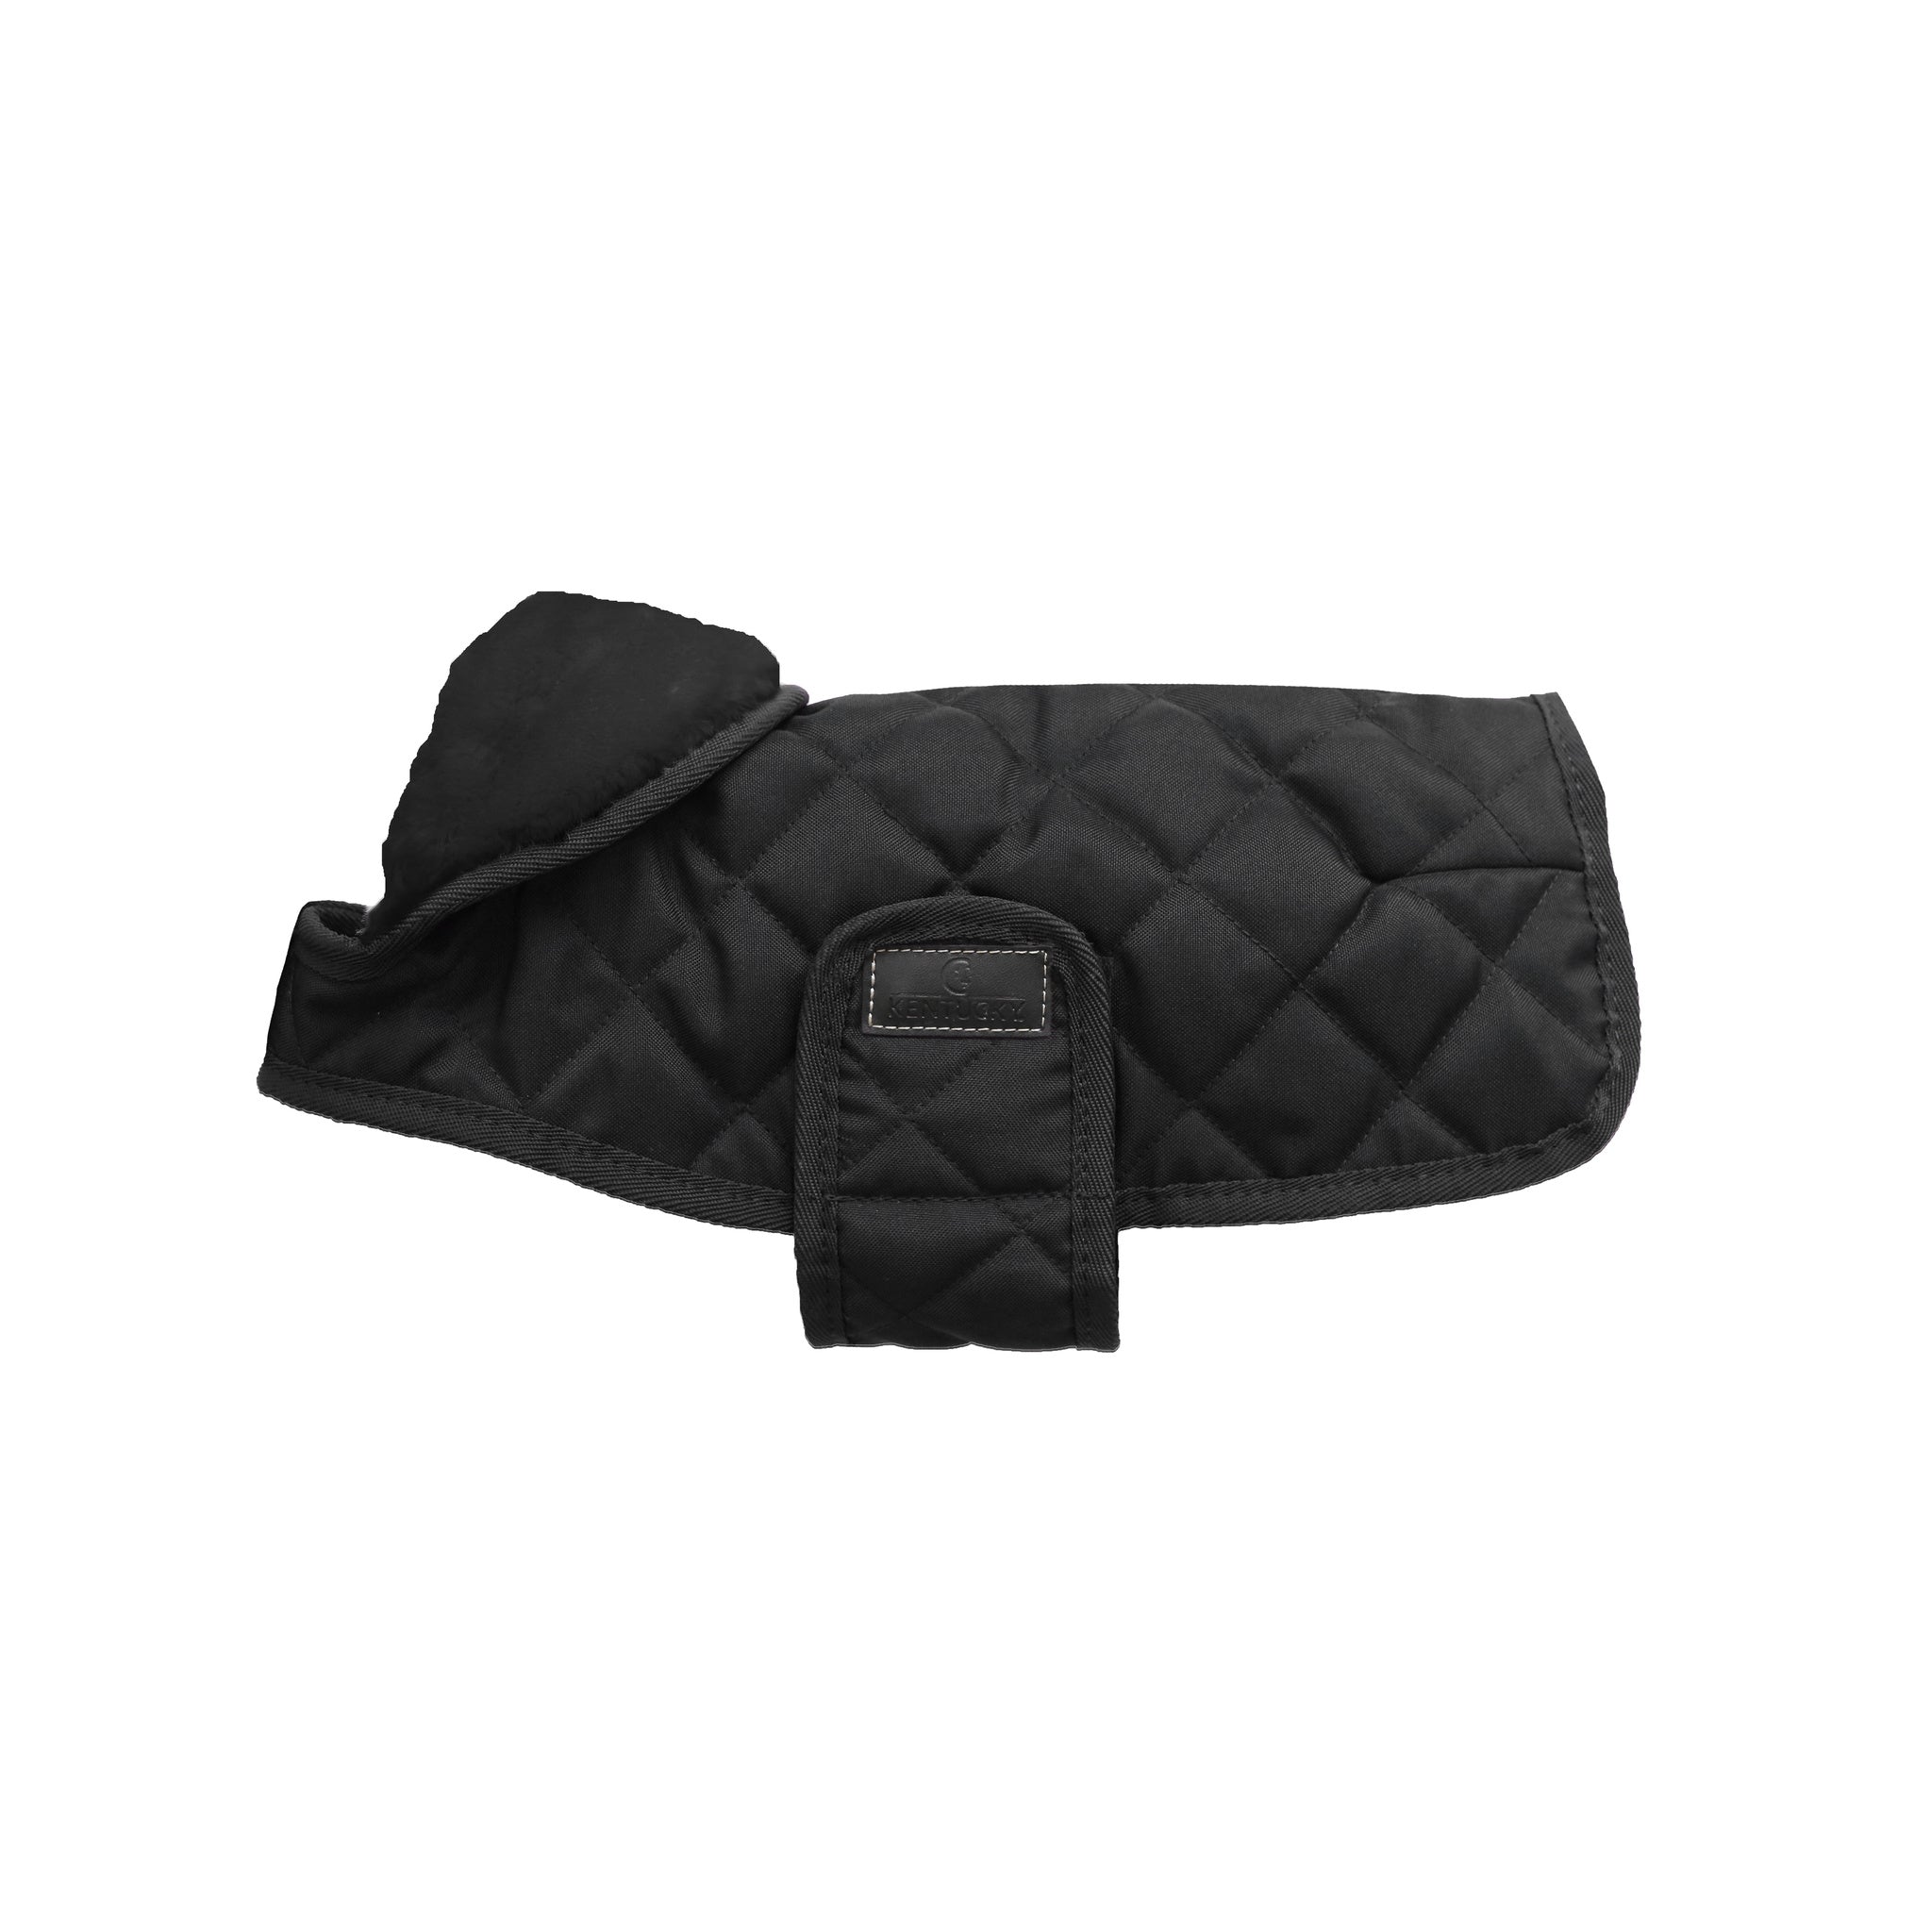 The Kentucky outstanding Dog Coat was made to match the new line of horse rugs. It has a filling of 160gand features an artificial rabbit skin lining for extra comfort which creates tiny air pockets that trap and retain the body heat of the dog. The soft lining also polishes the dog’s hairs and the artificial sheepskin on the neck offers comfort and warmth.